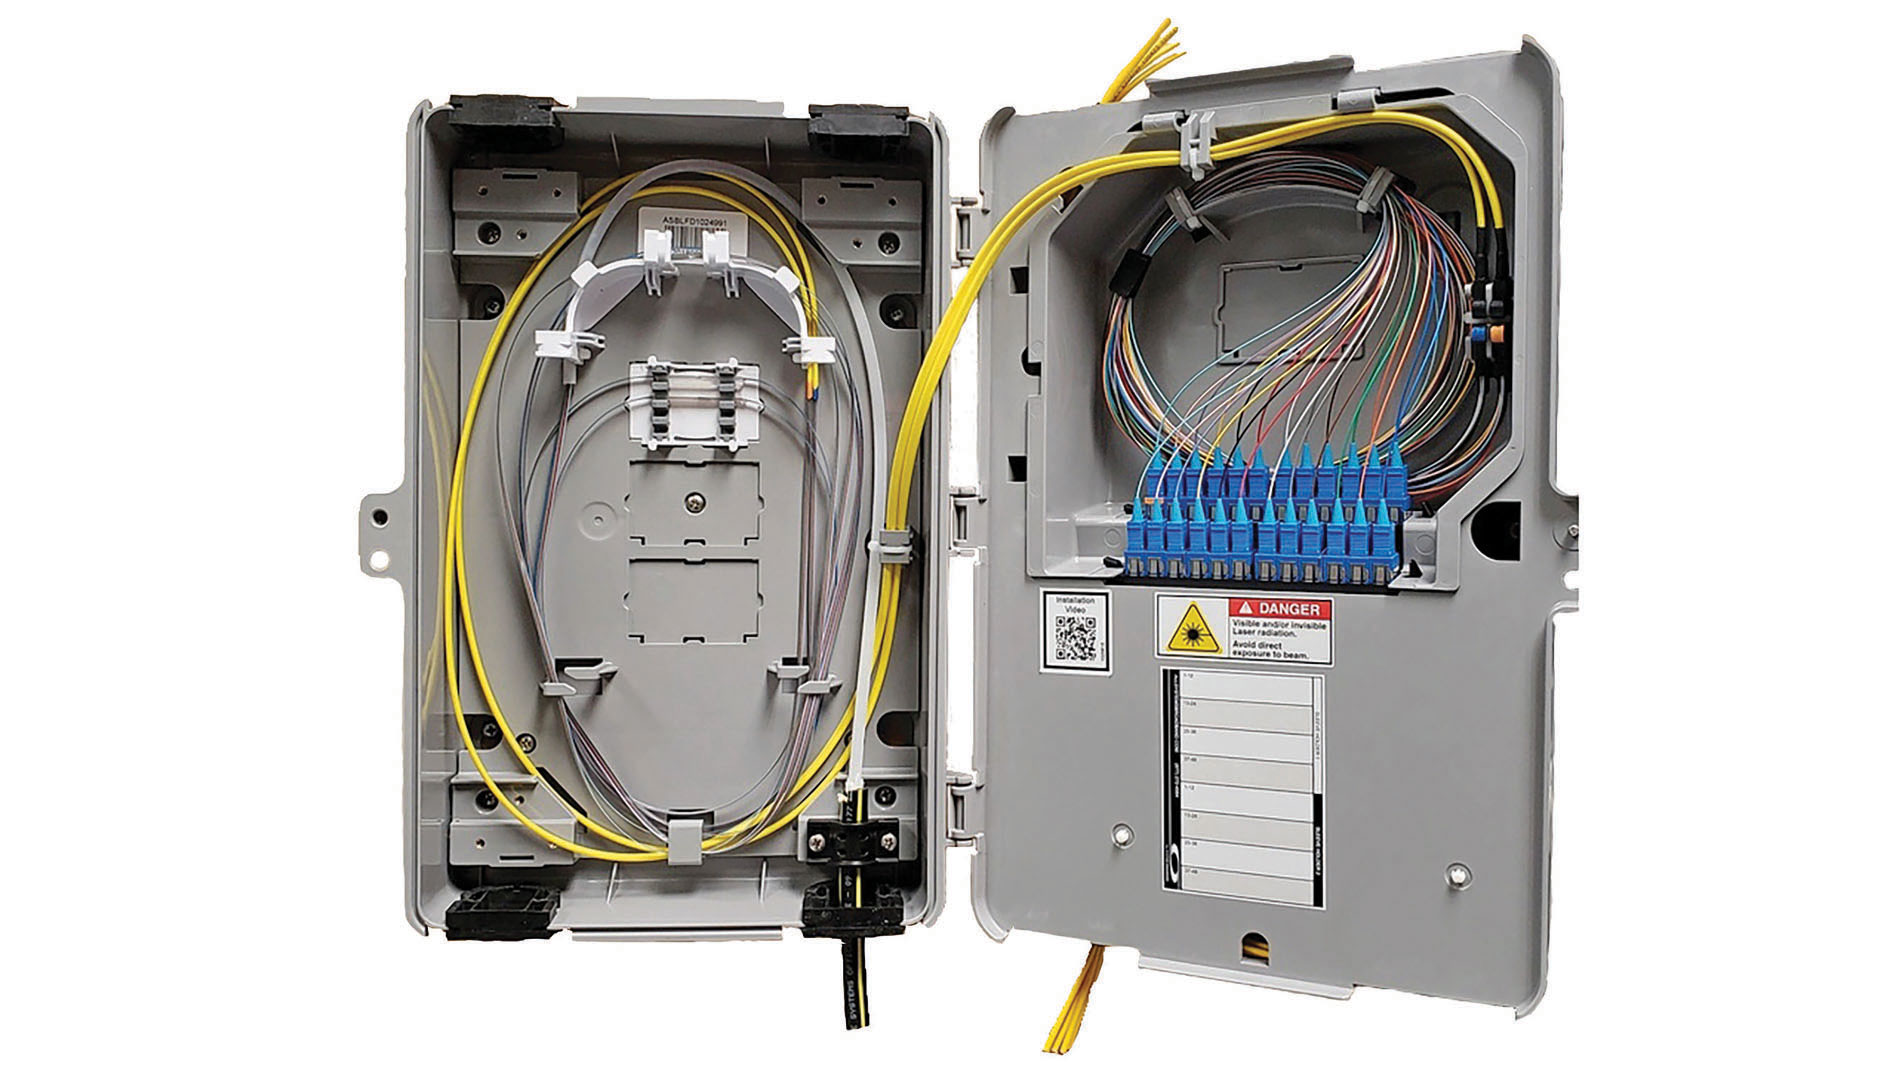 Fiber optic cables in a gray enclosure. Image by Amphenol Network Solutions.